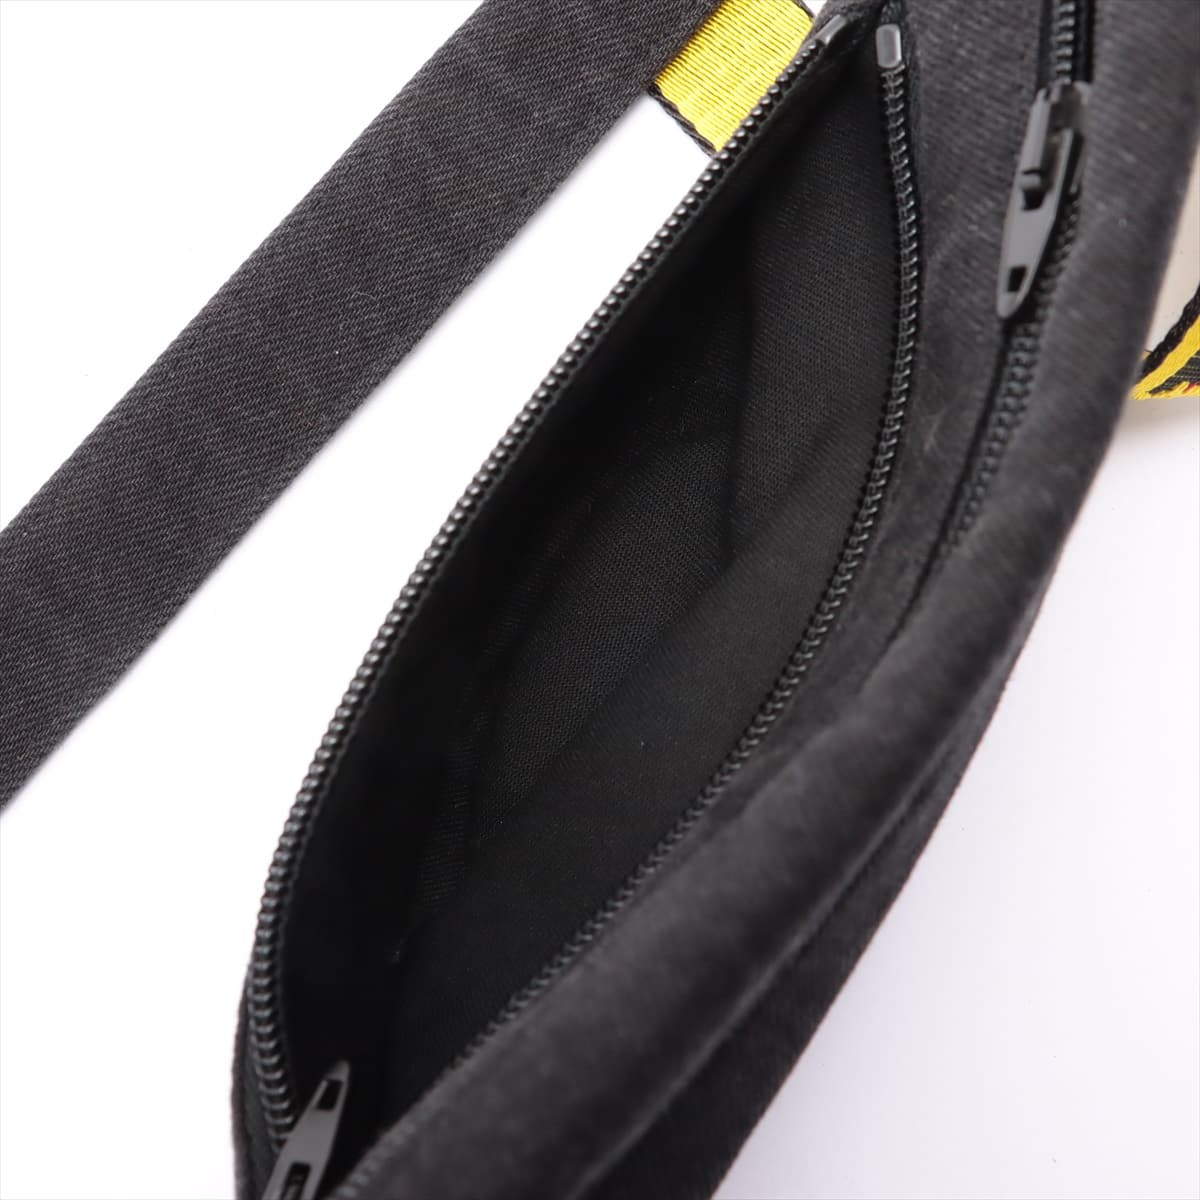 Off-White canvas Sling backpack Black x yellow